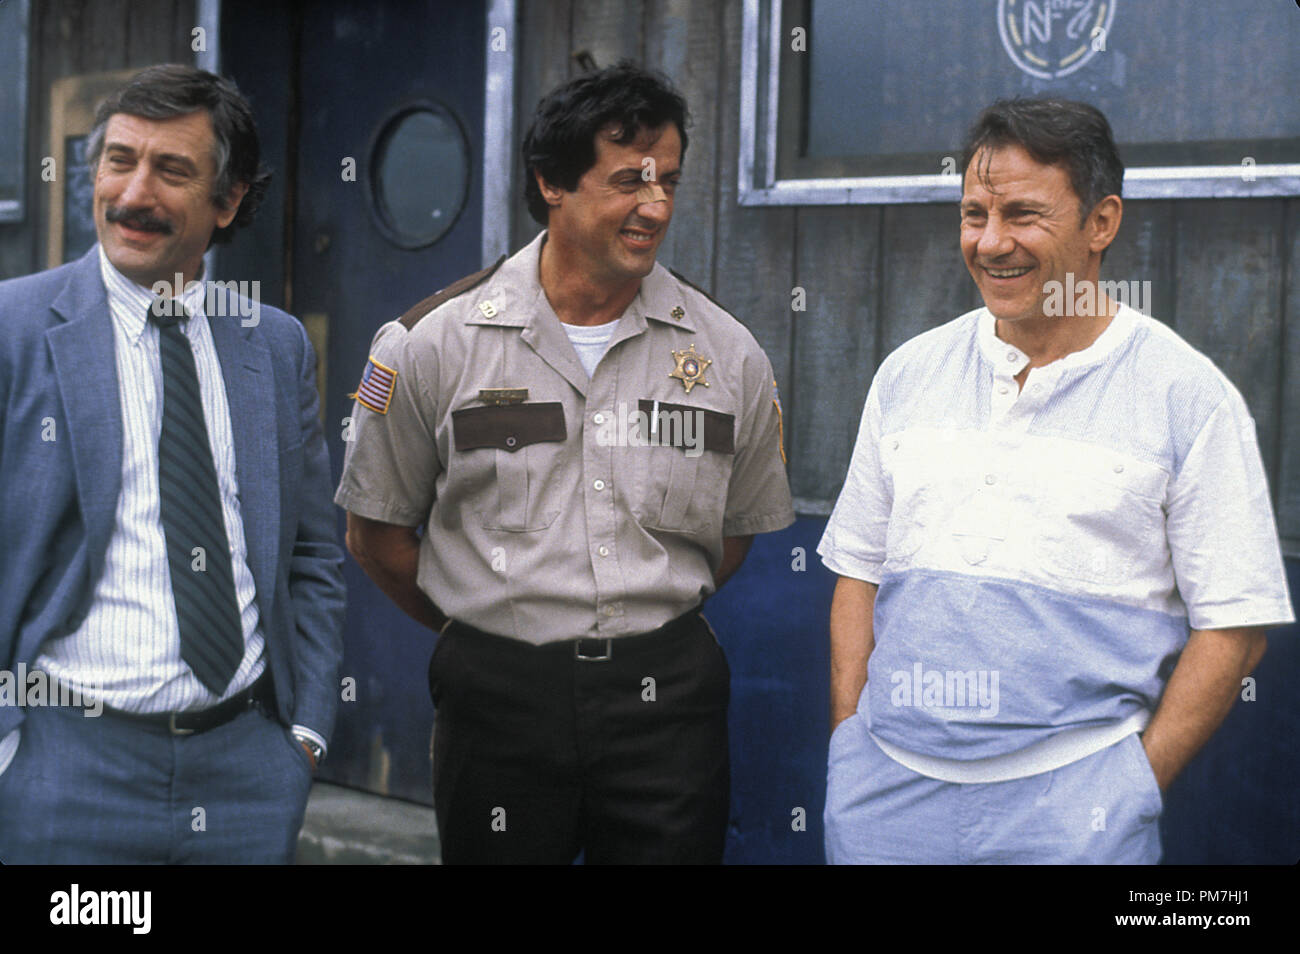 Film Still from 'Cop Land' Robert De Niro, Sylvester Stallone, Harvey Keitel © 1997 Miramax Films Photo Credit: Sam Emerson   File Reference # 31013377THA  For Editorial Use Only - All Rights Reserved Stock Photo